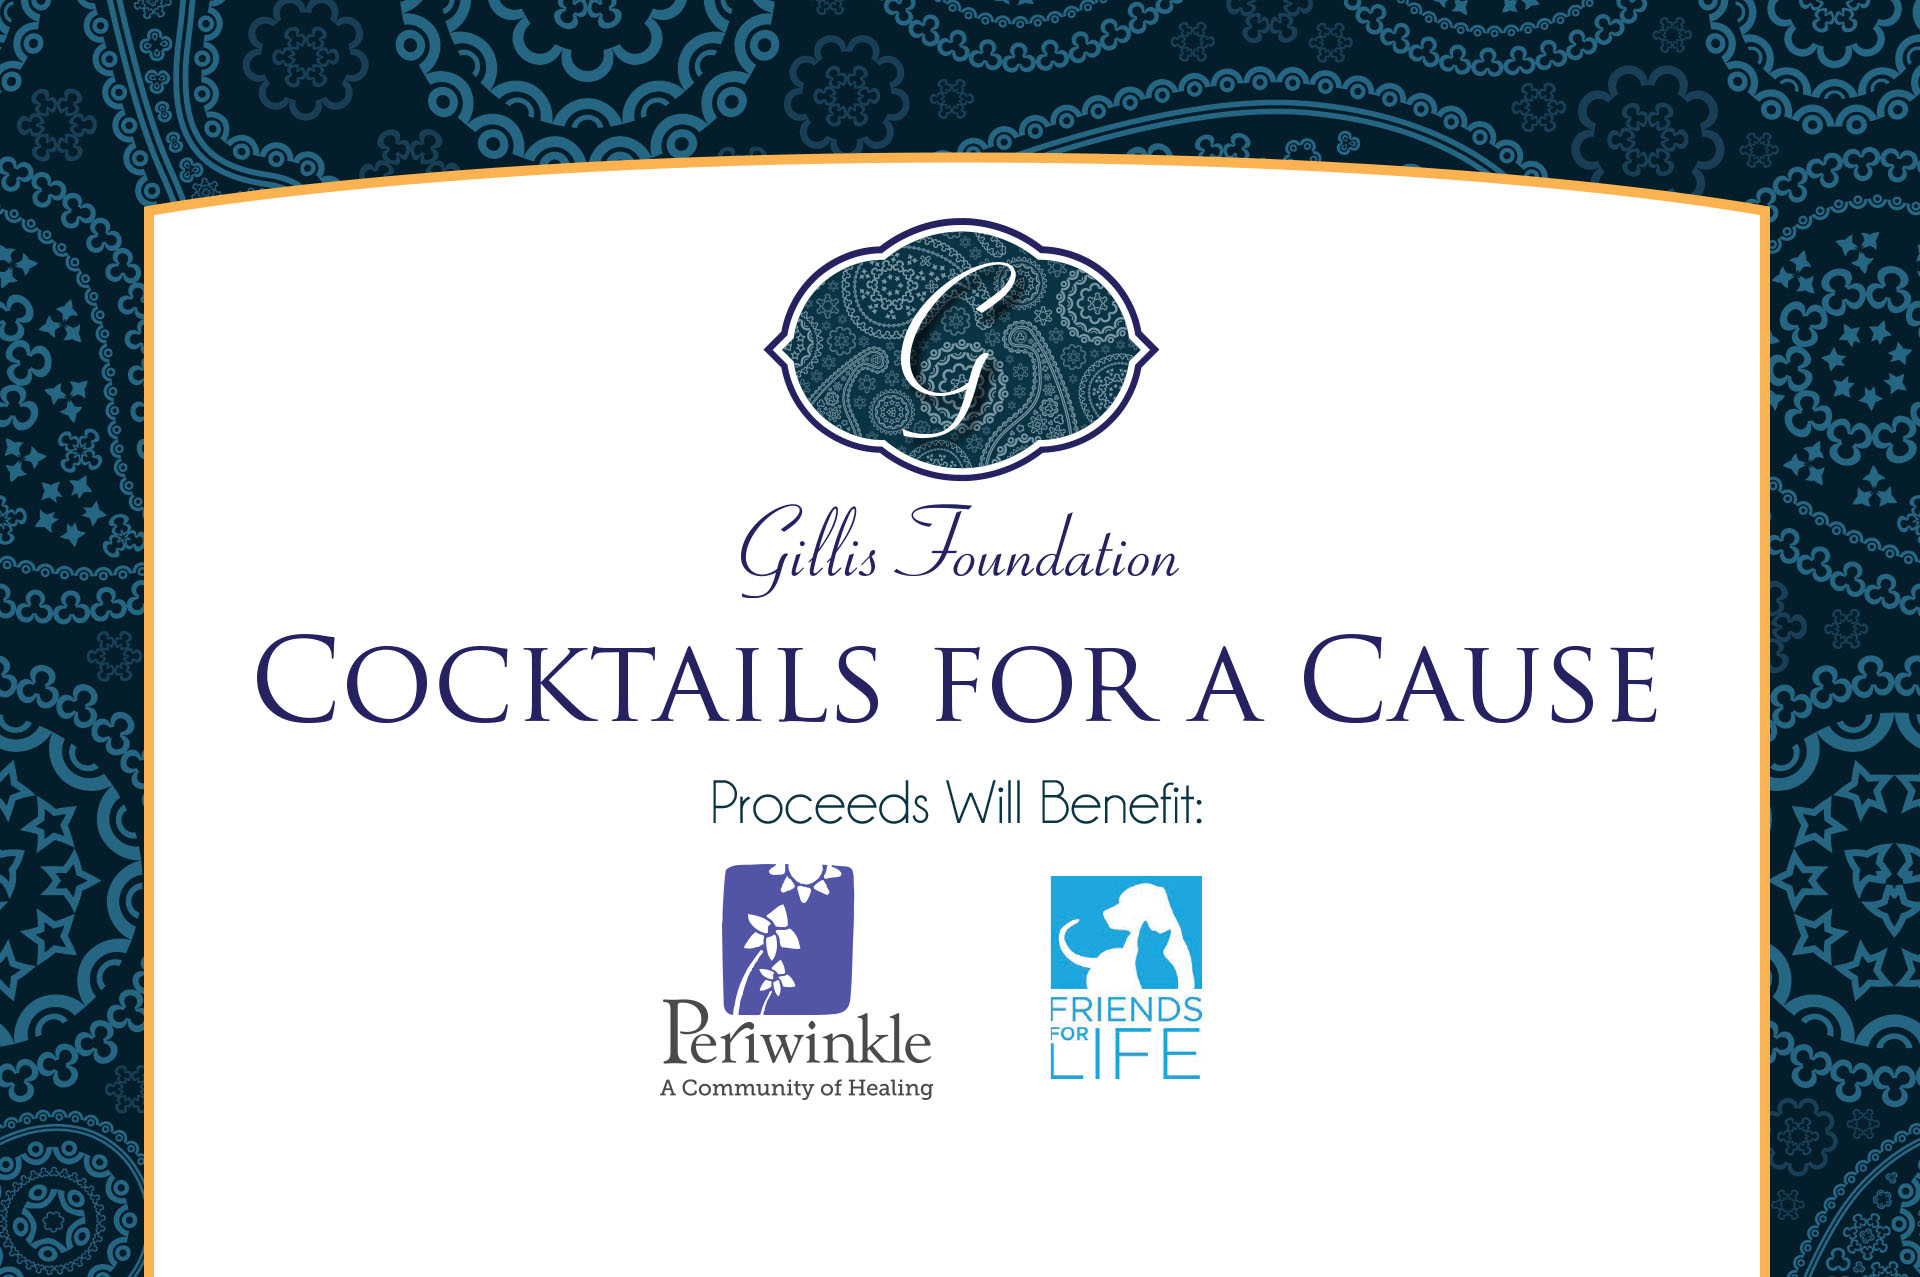 Gillis Foundation Cocktails for a Cause. Proceeds will benefit Periwinkle Foundation and Friends for Life Animal Shelter.